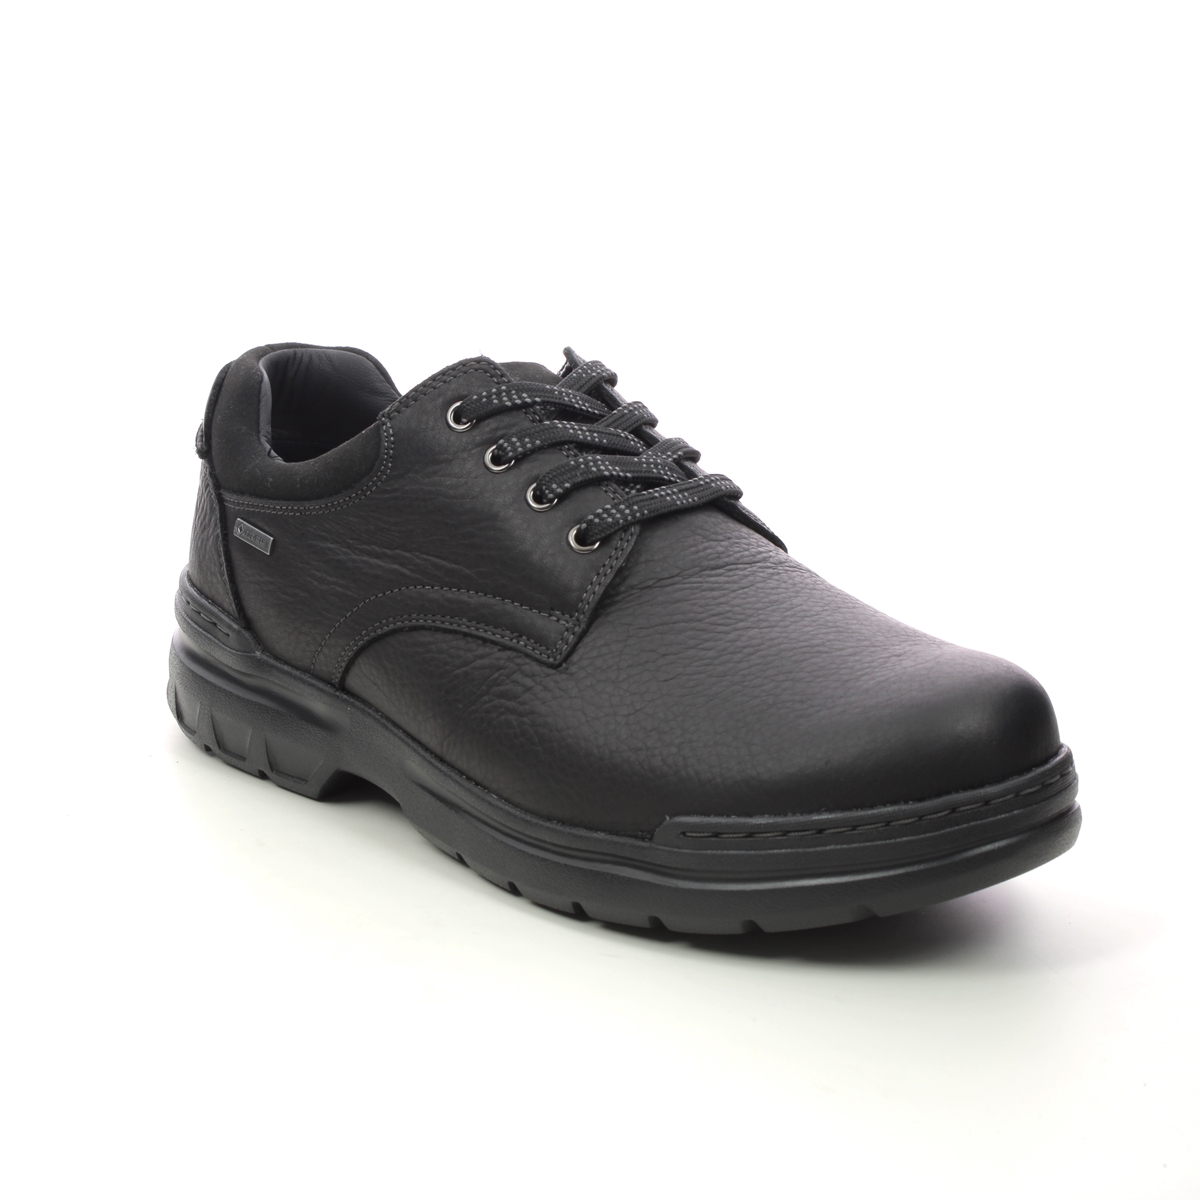 Clarks Rockie Walk Gtx Black Leather Mens Comfort Shoes 734648H In Size 8 In Plain Black Leather H Width Fitting Extra Wide